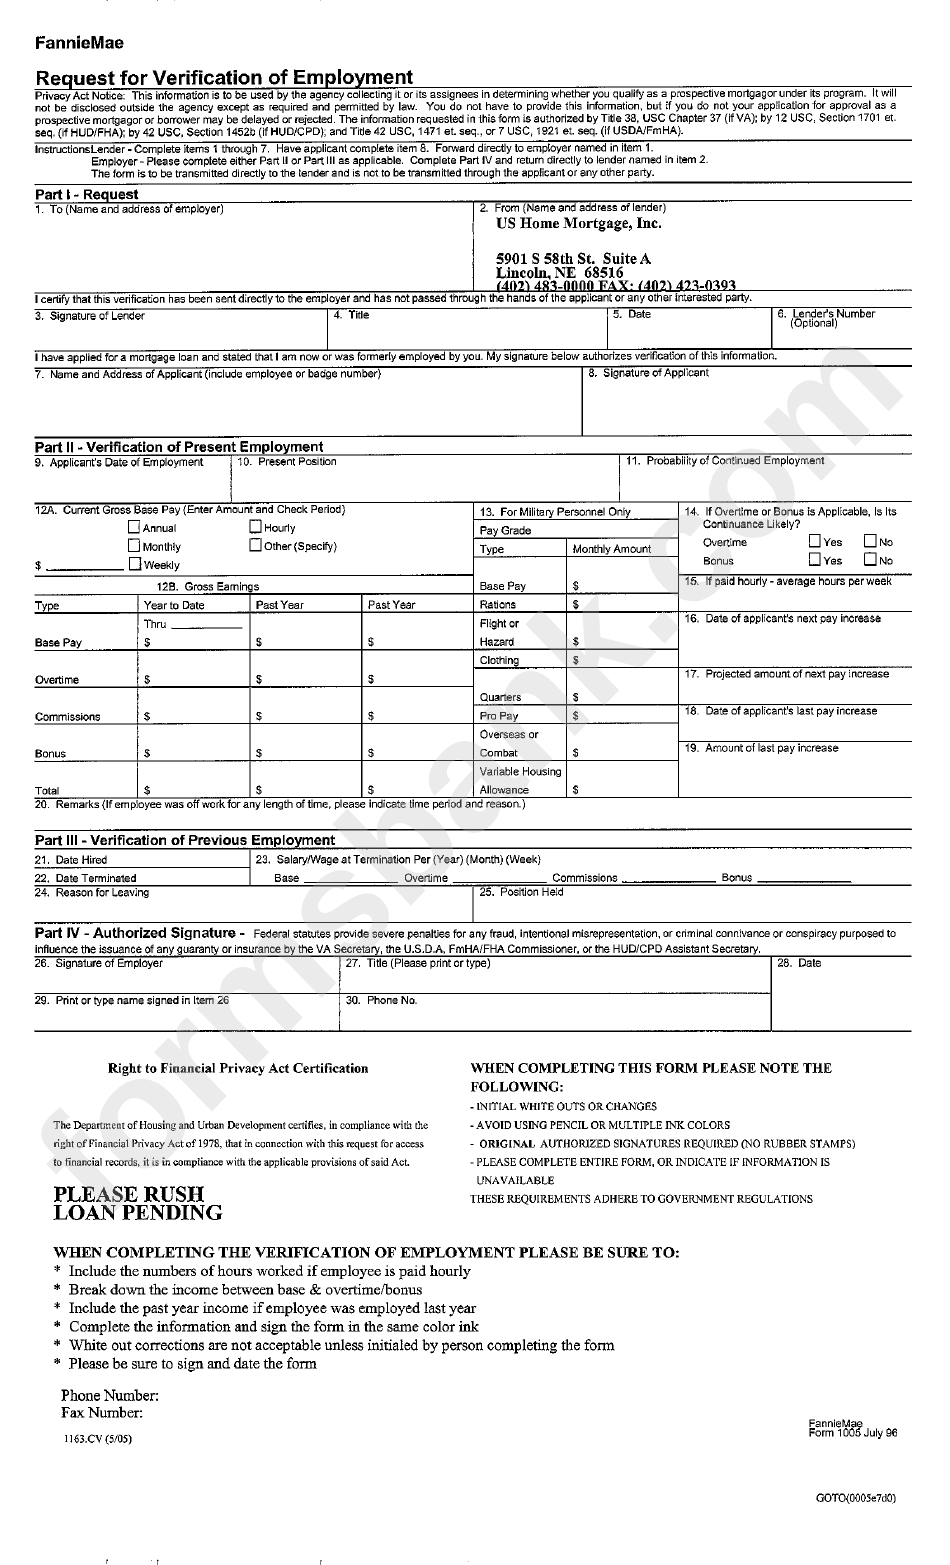 form-1005-fannie-mae-request-for-verification-of-employment-printable